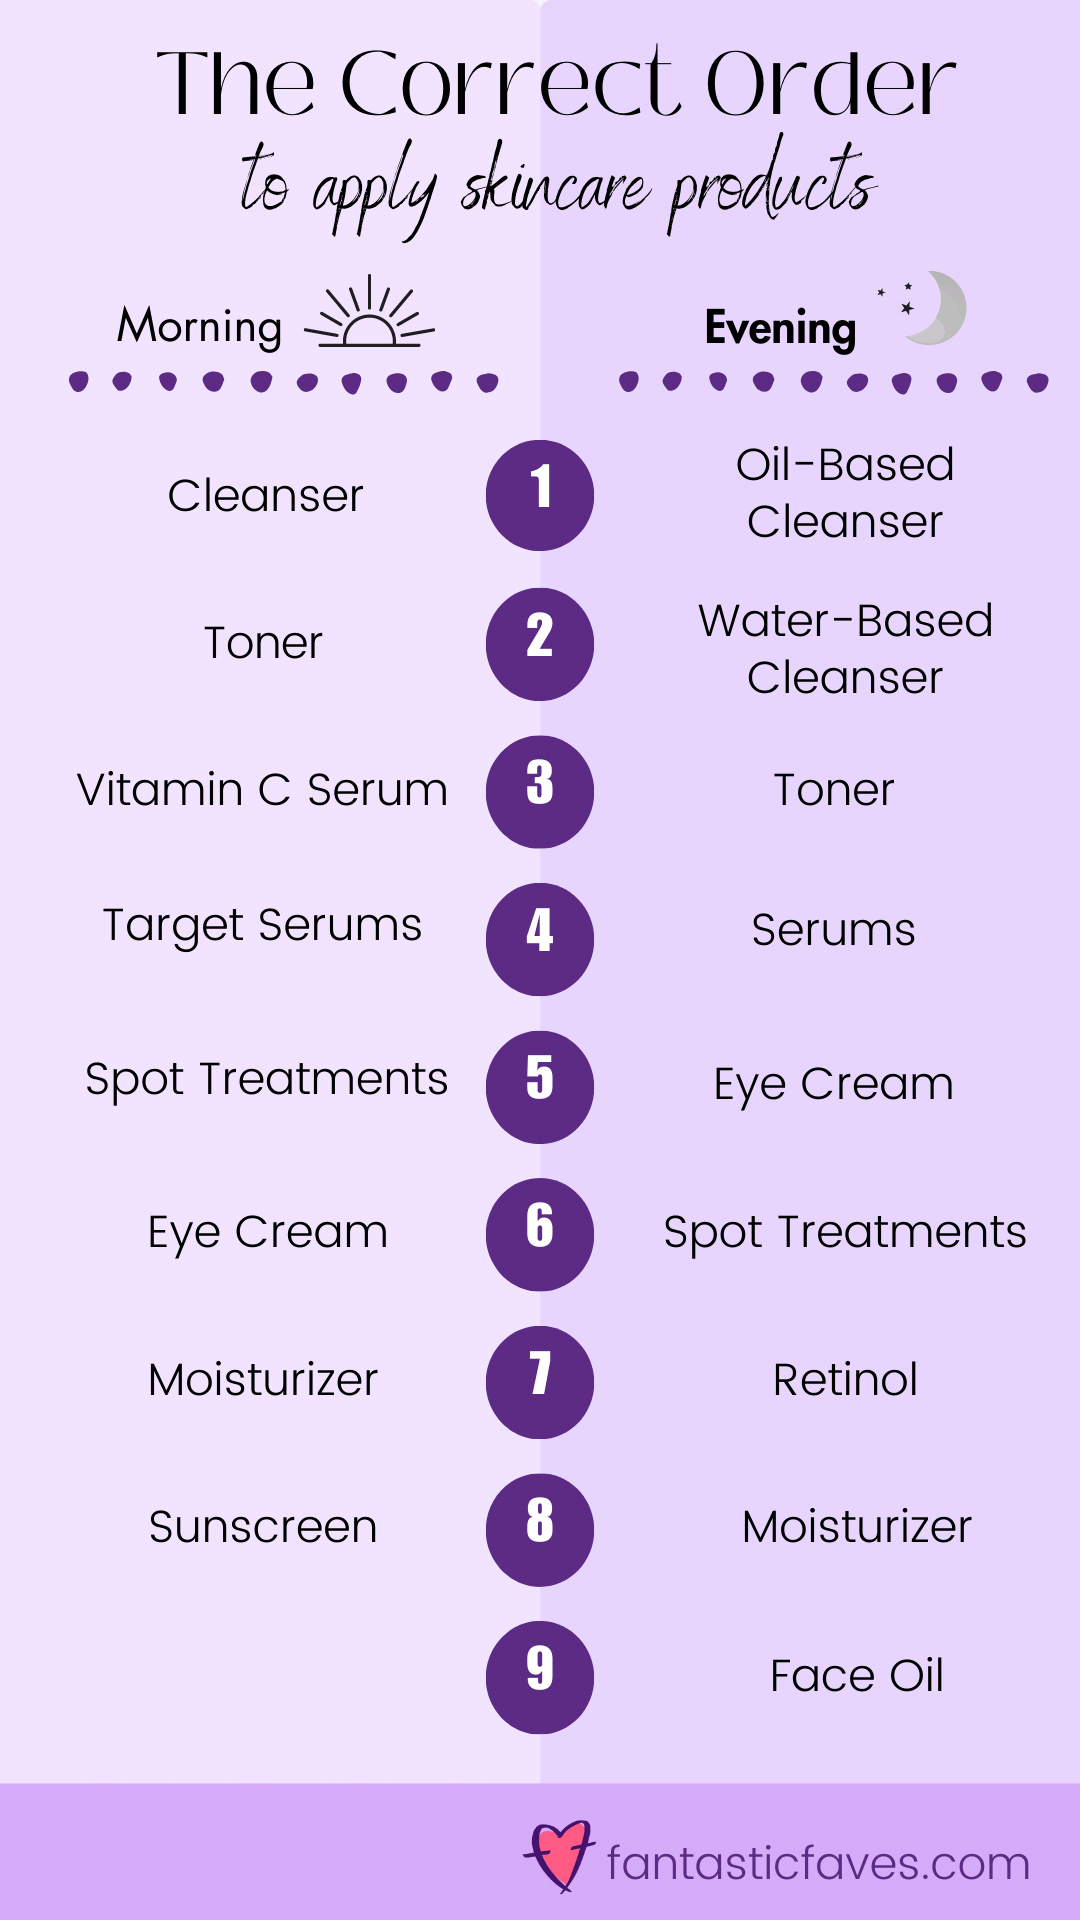 The Great Debate: Do You Put Eye Cream On Before Or After Moisturizer?